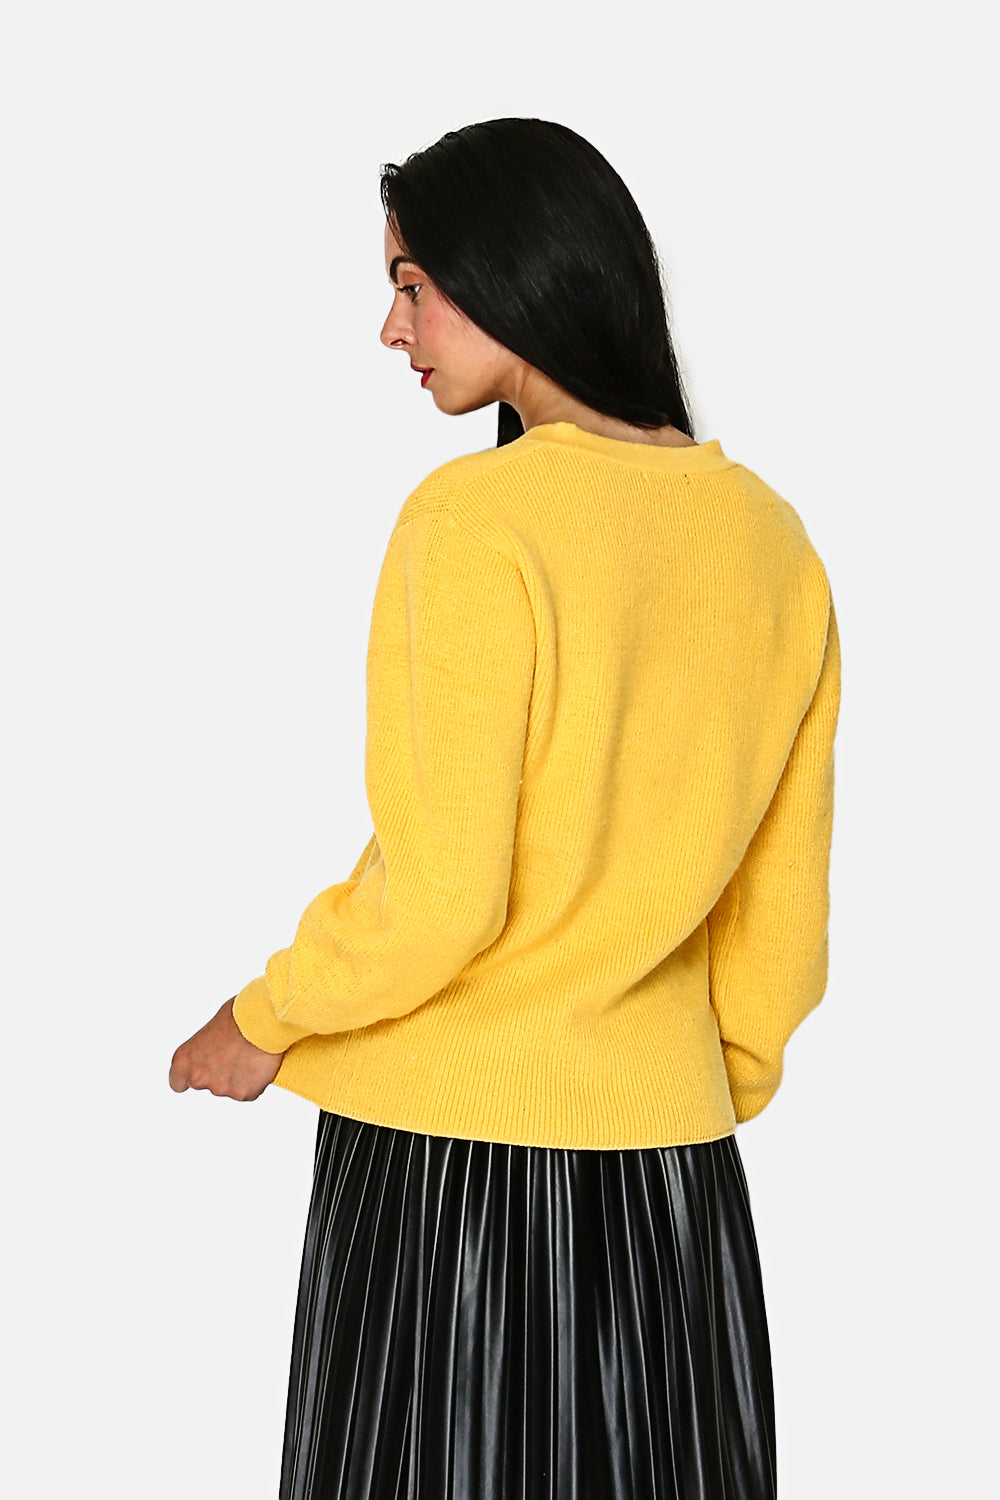 Sweater with large V-neck, long, slightly balloon sleeves